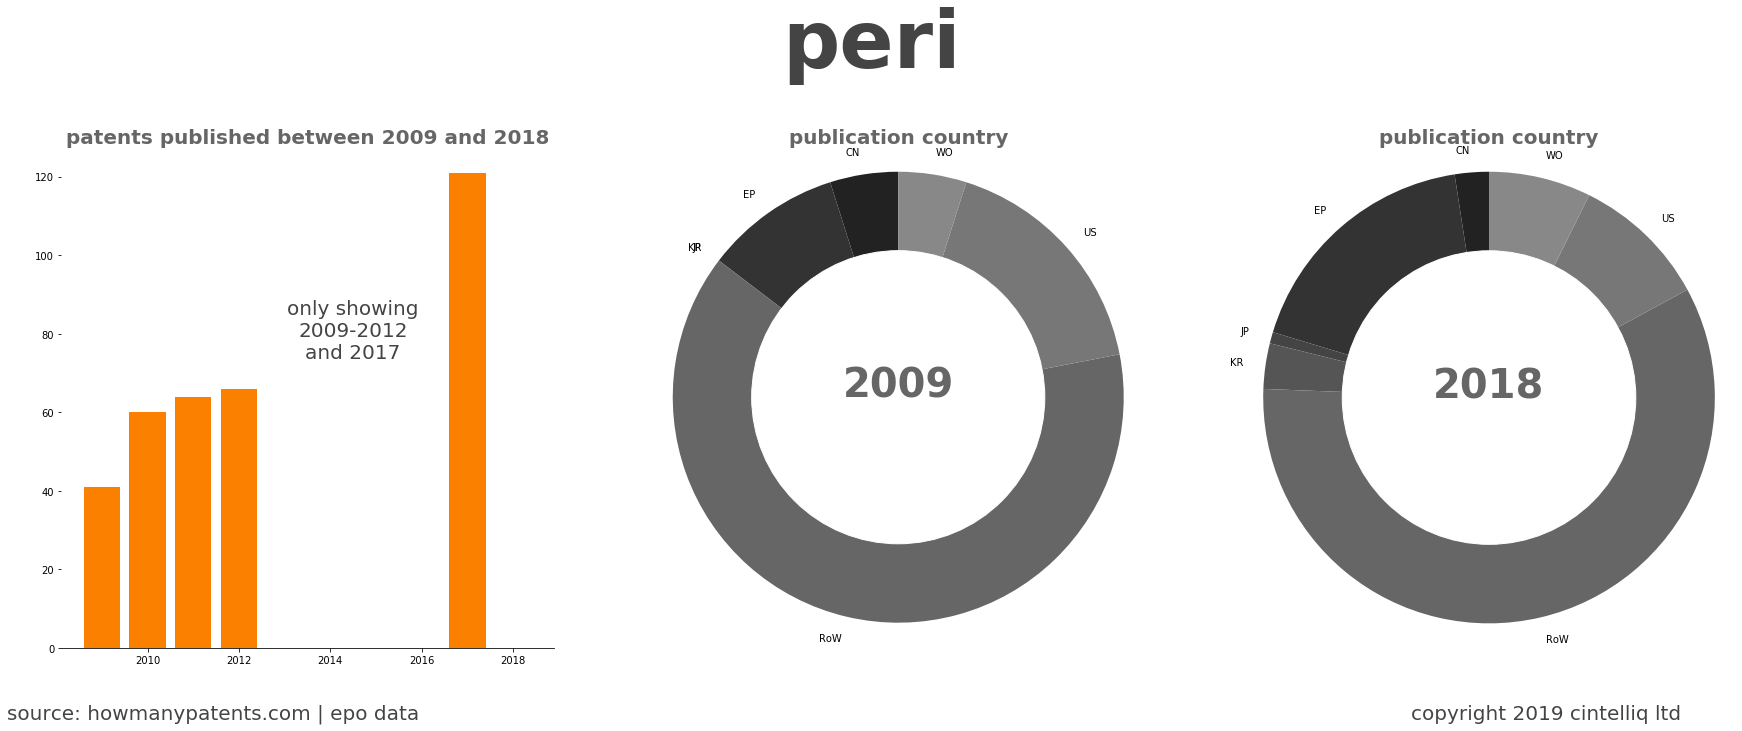 summary of patents for Peri